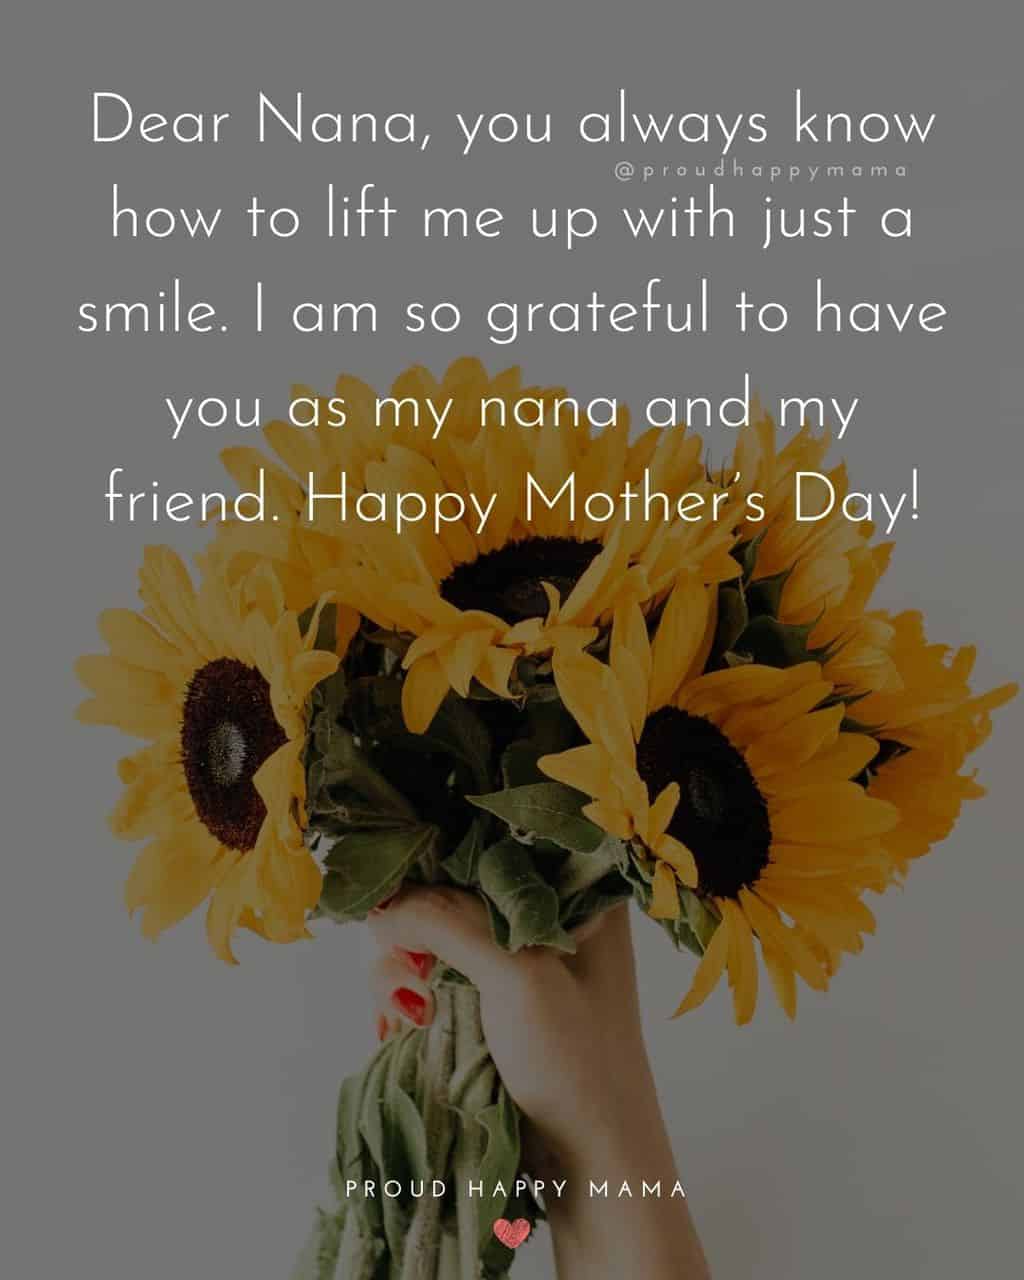 Happy Mothers Day Quotes To Grandma - Dear Nana, you always know how to lift me up with just a smile. I am so grateful